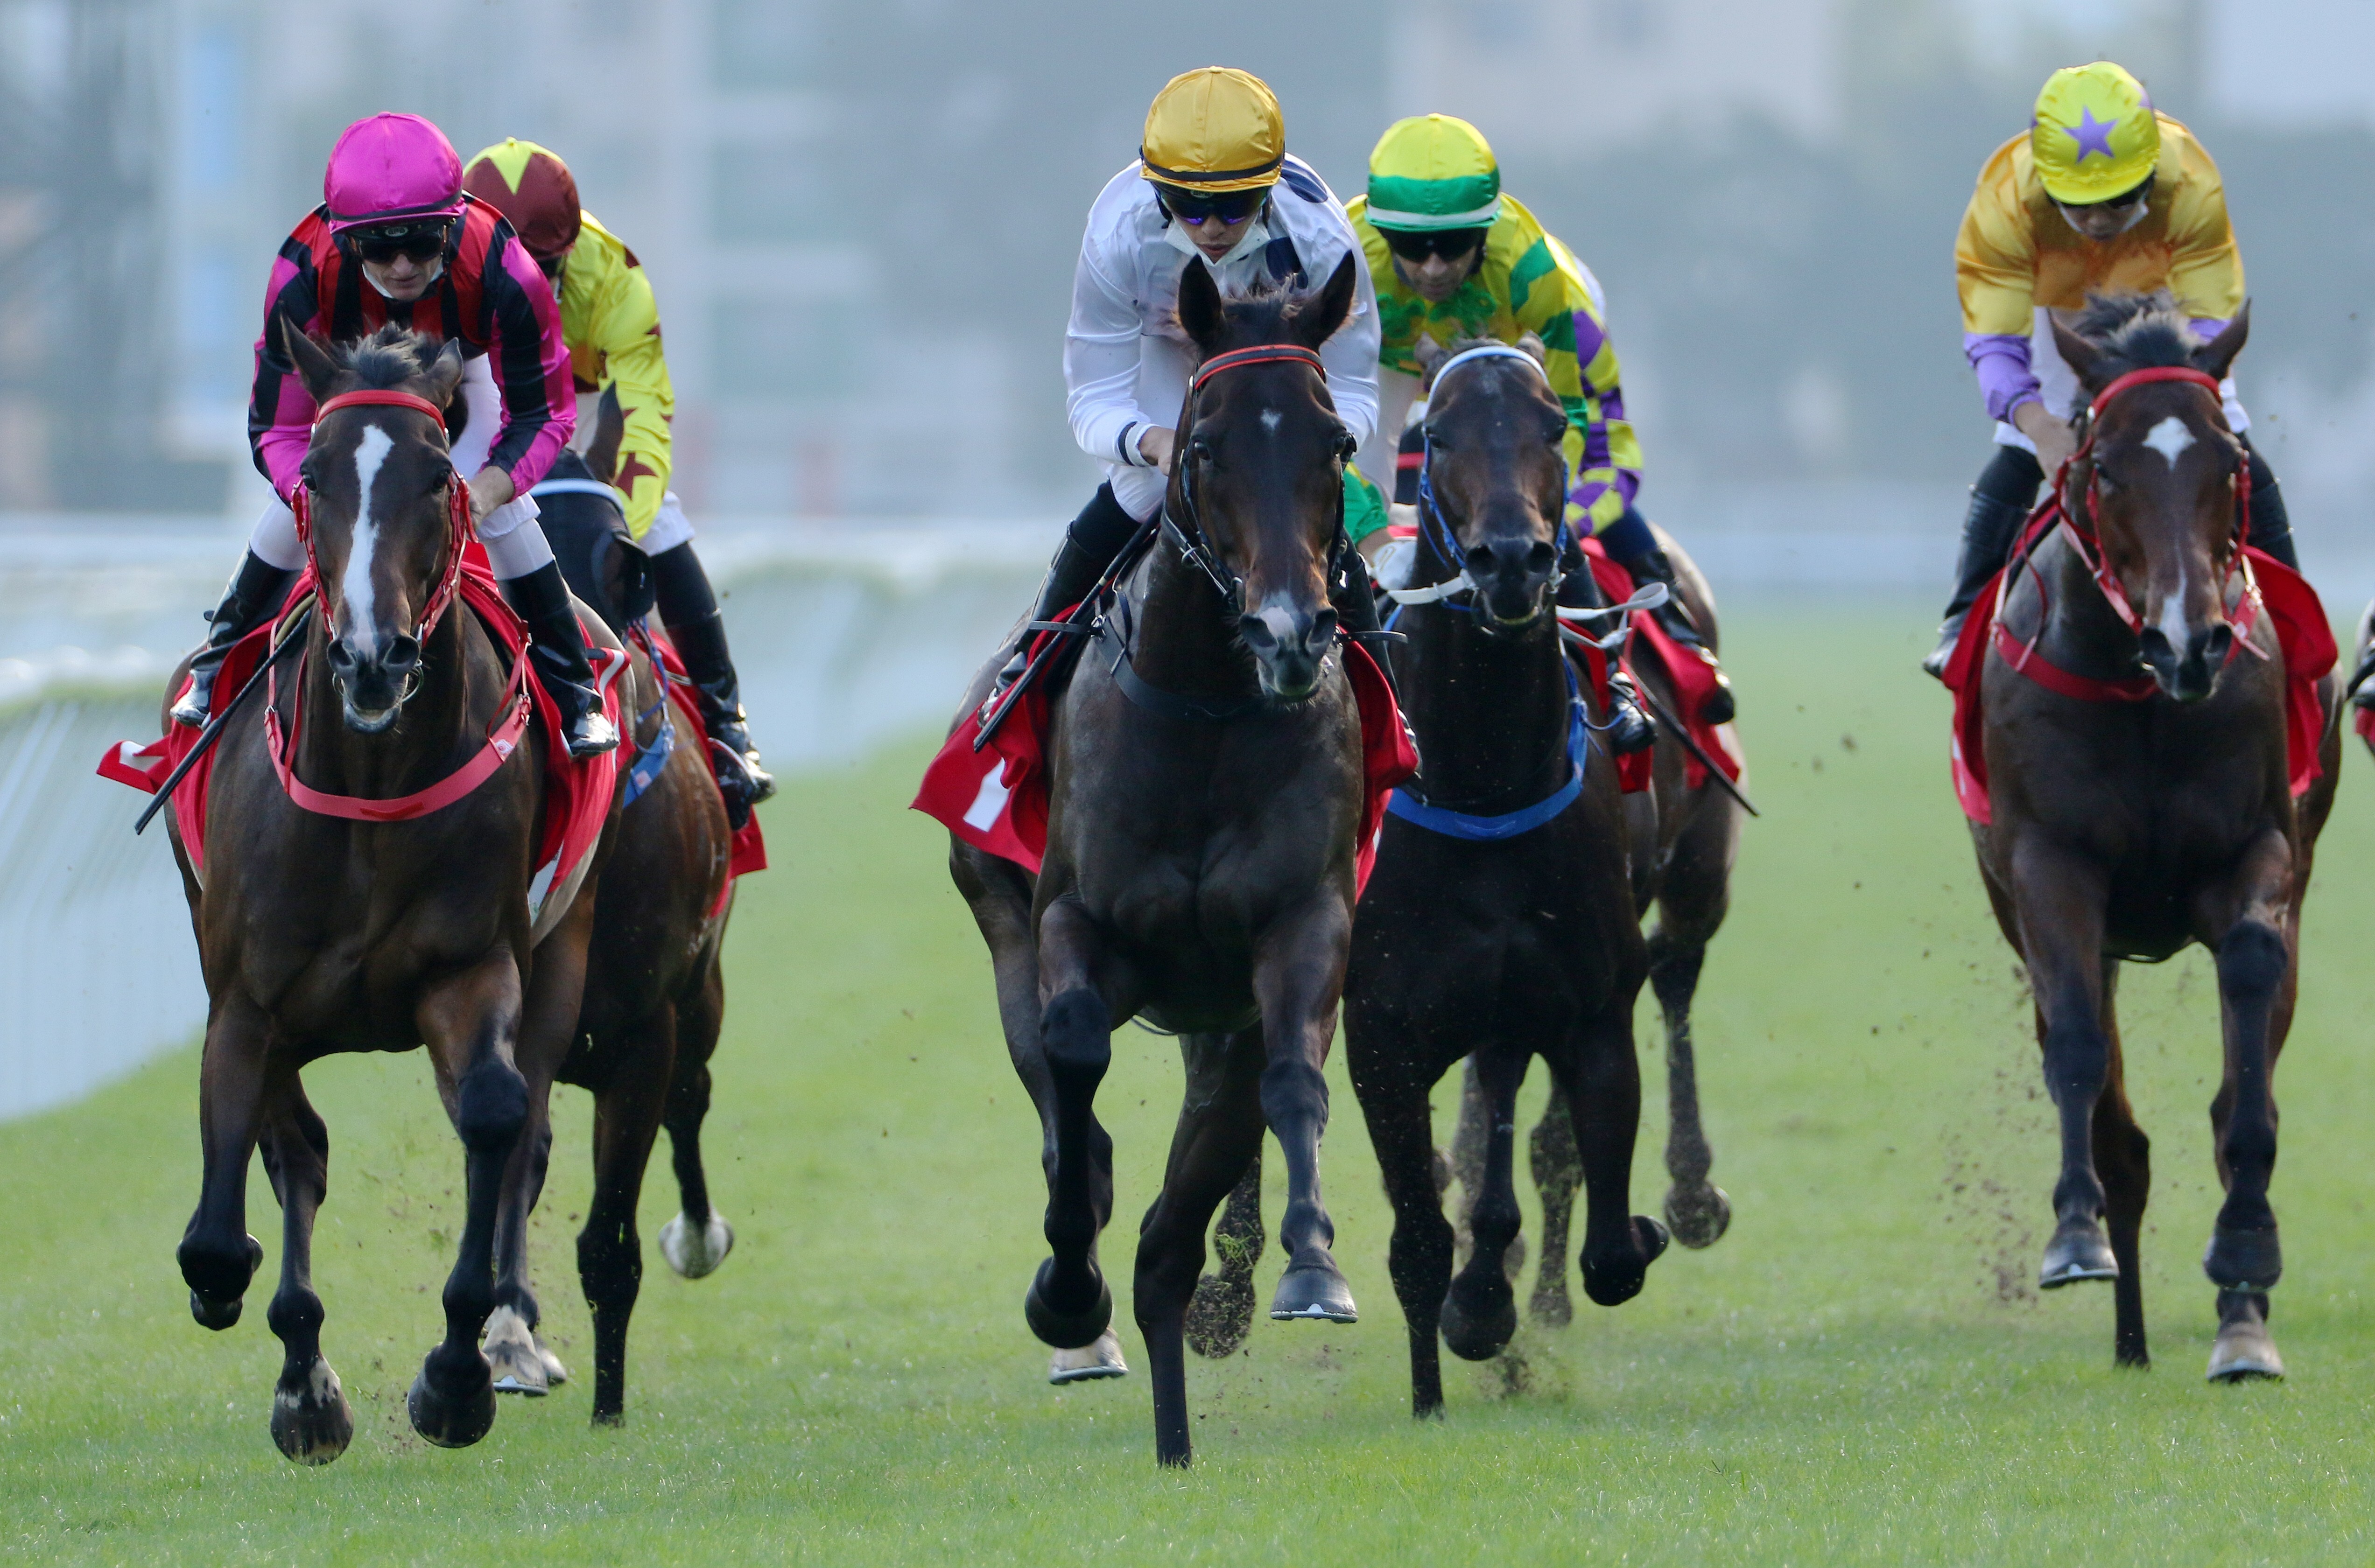 Vincent Ho guides Golden Sixty (white silks) to victory in the Group Two Jockey Club Mile at Sha Tin on Sunday. Photos: Kenneth Chan